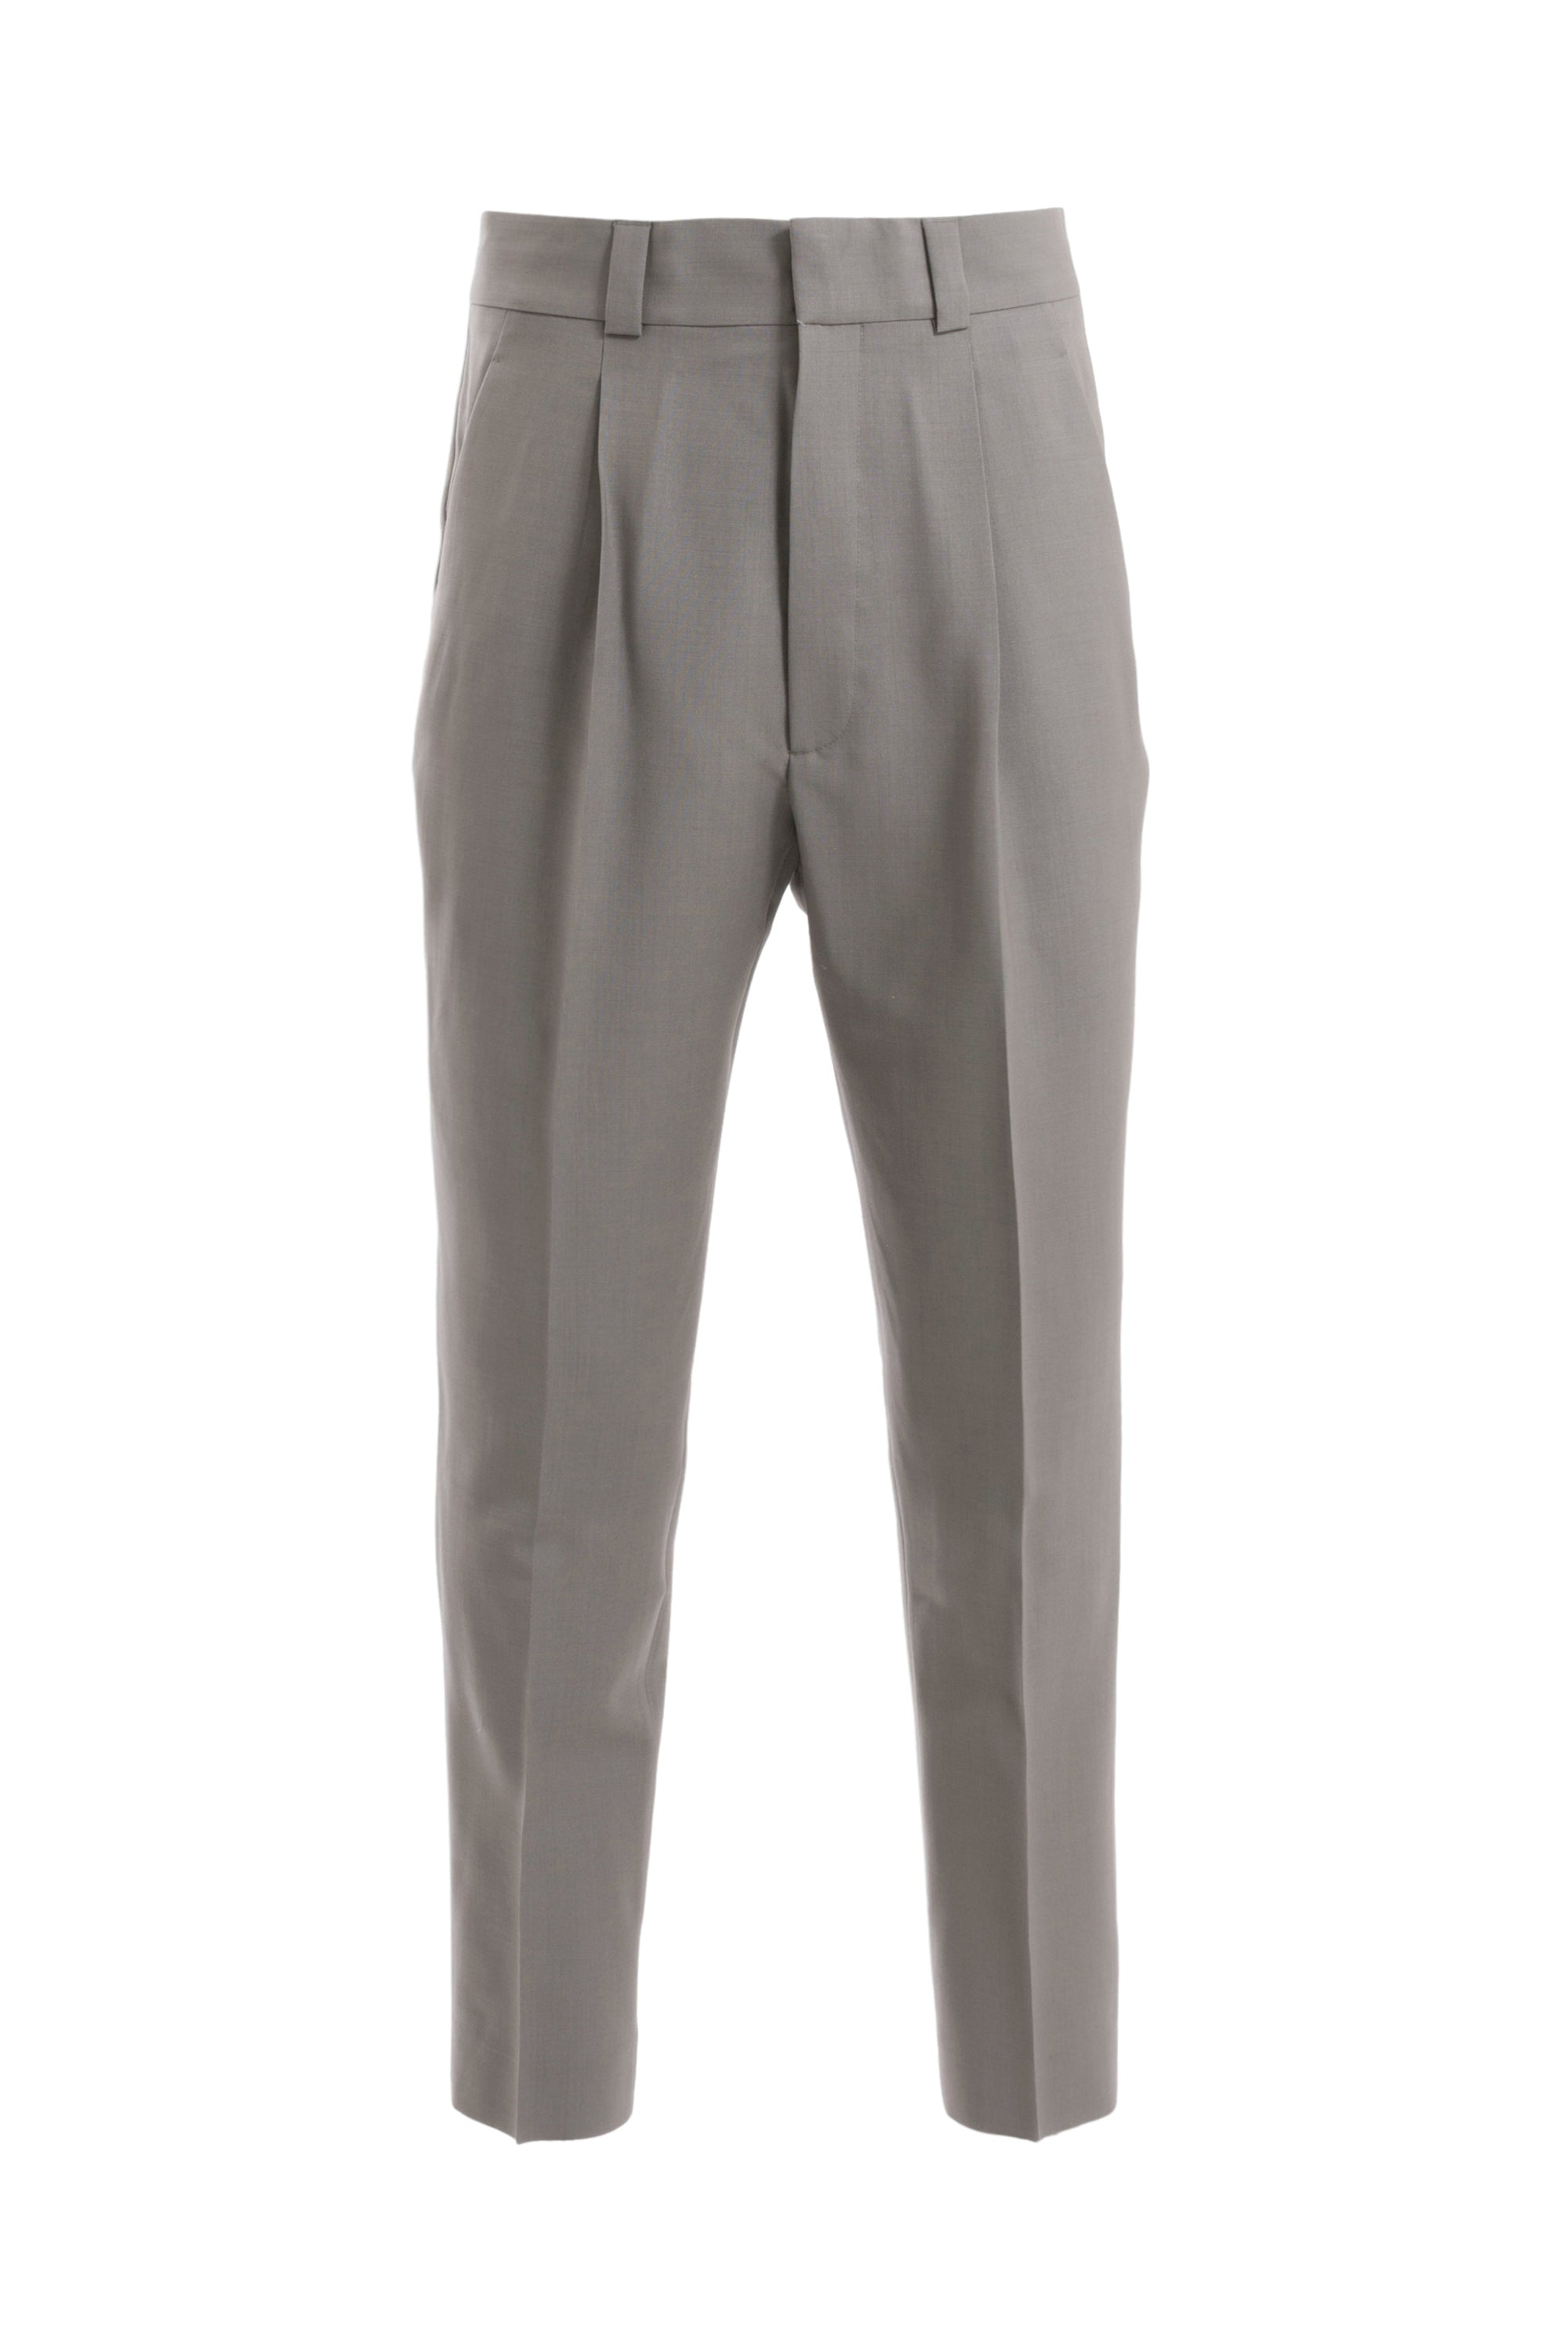 FEAR OF GOD THE ETERNAL COLLECTION ETERNAL WOOL MOHAIR SUIT PANT